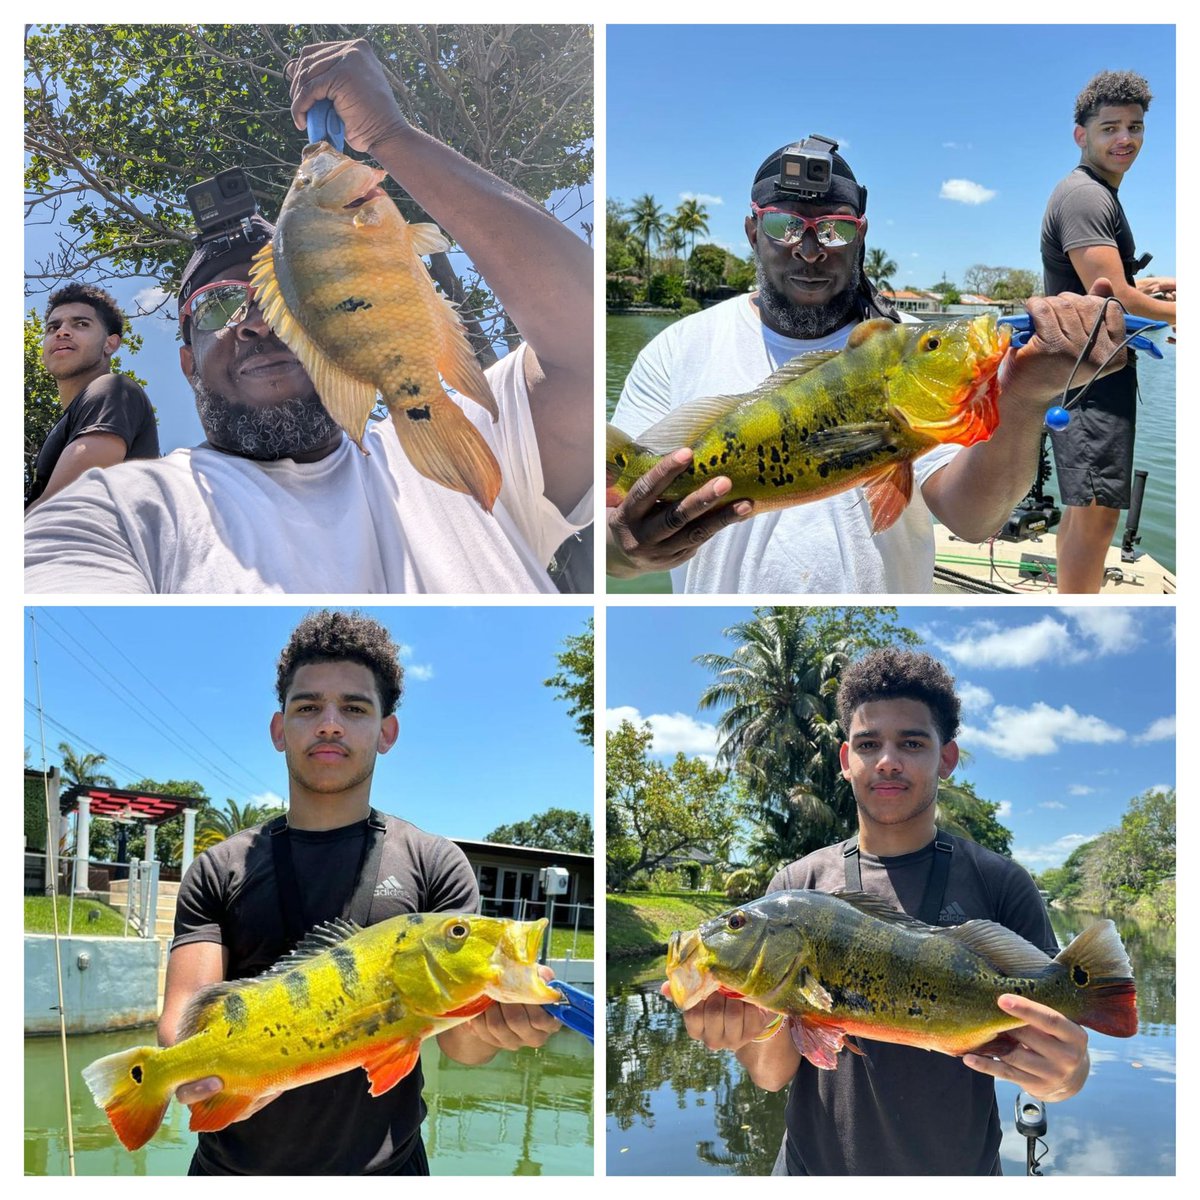 @RomanTillmon Humbled Me With 7 Trophy Sized Peacock Bass To My 3 😪...So Since A Bet Is A Bet 👉🏿 ROMAN TILLMON IS THE BEST FISHERMAN IN THIS FAMILY 🙄🙄🙄 #MIAMIFLORIDA #LIKEFATHERLIKESON Fishing And Football 👉🏿 ITS WHAT WE DO 🤷🏿‍♂️